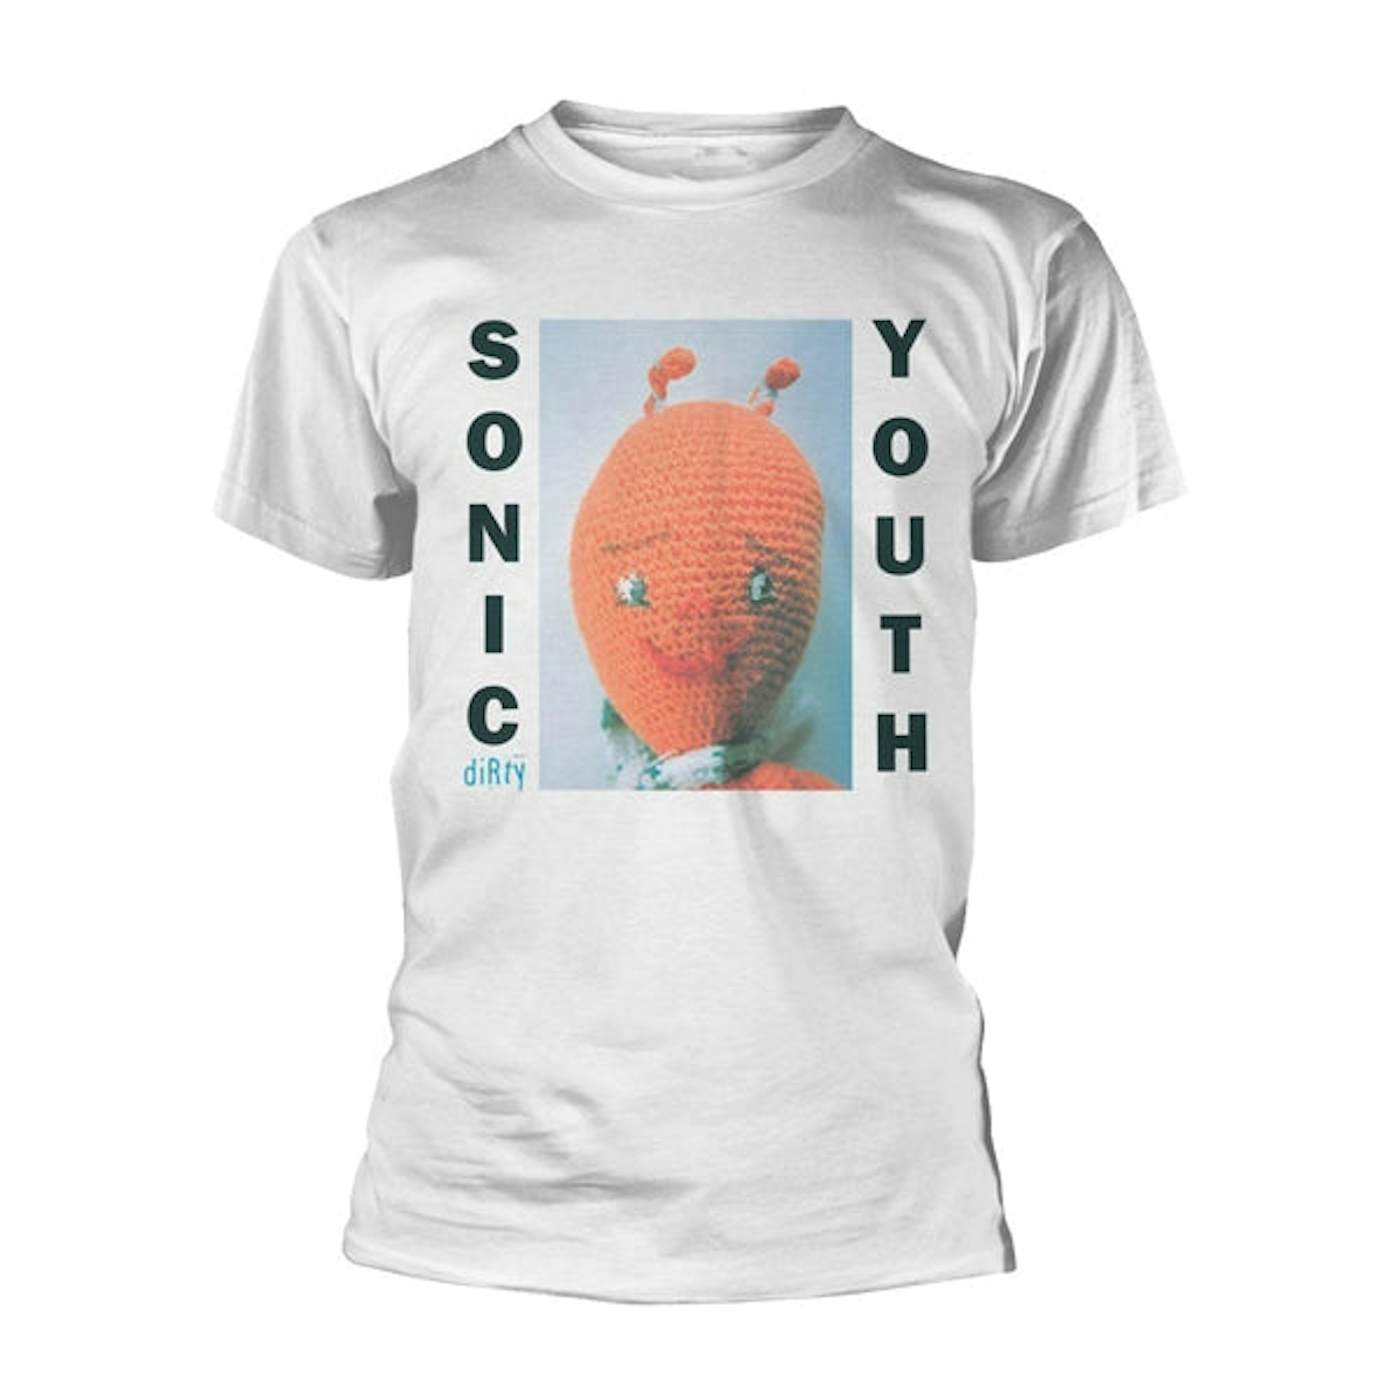 Sonic Youth T-Shirt - Dirty